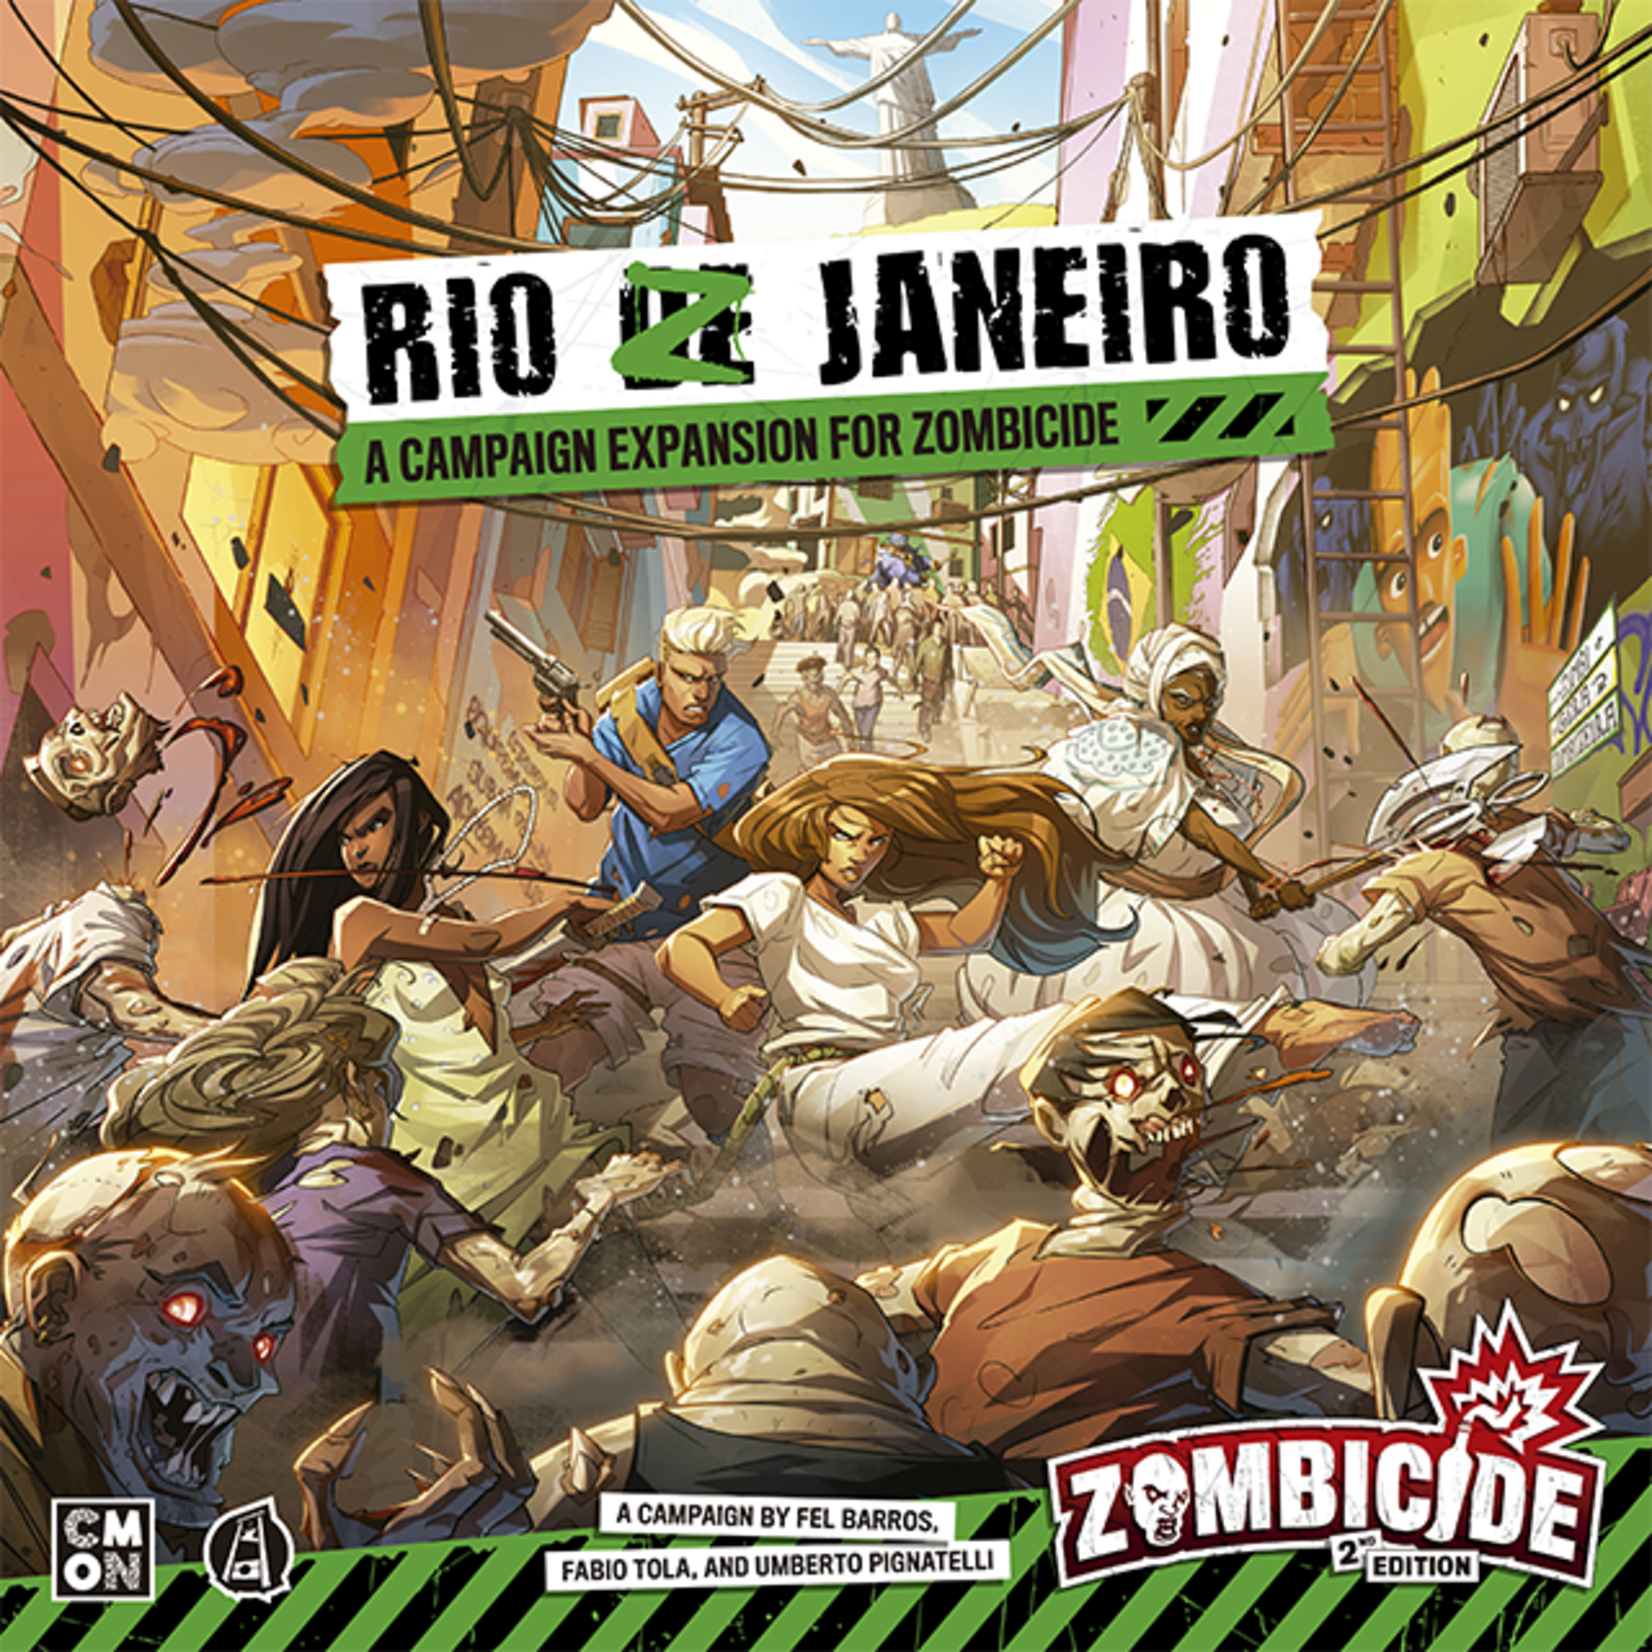 Zombicide (2nd Edition)